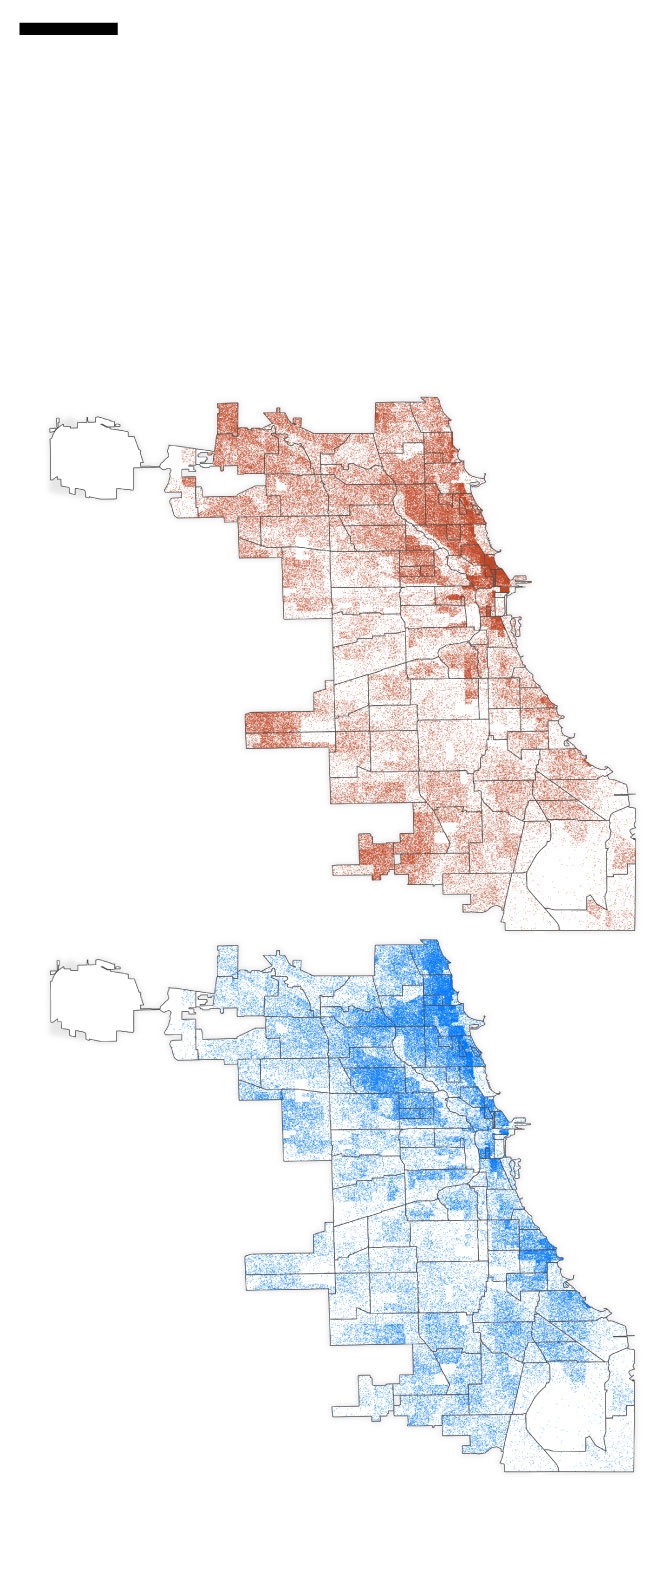 Dot density maps of Chicago showing voters against and for the Bring Home Chicago referendum.